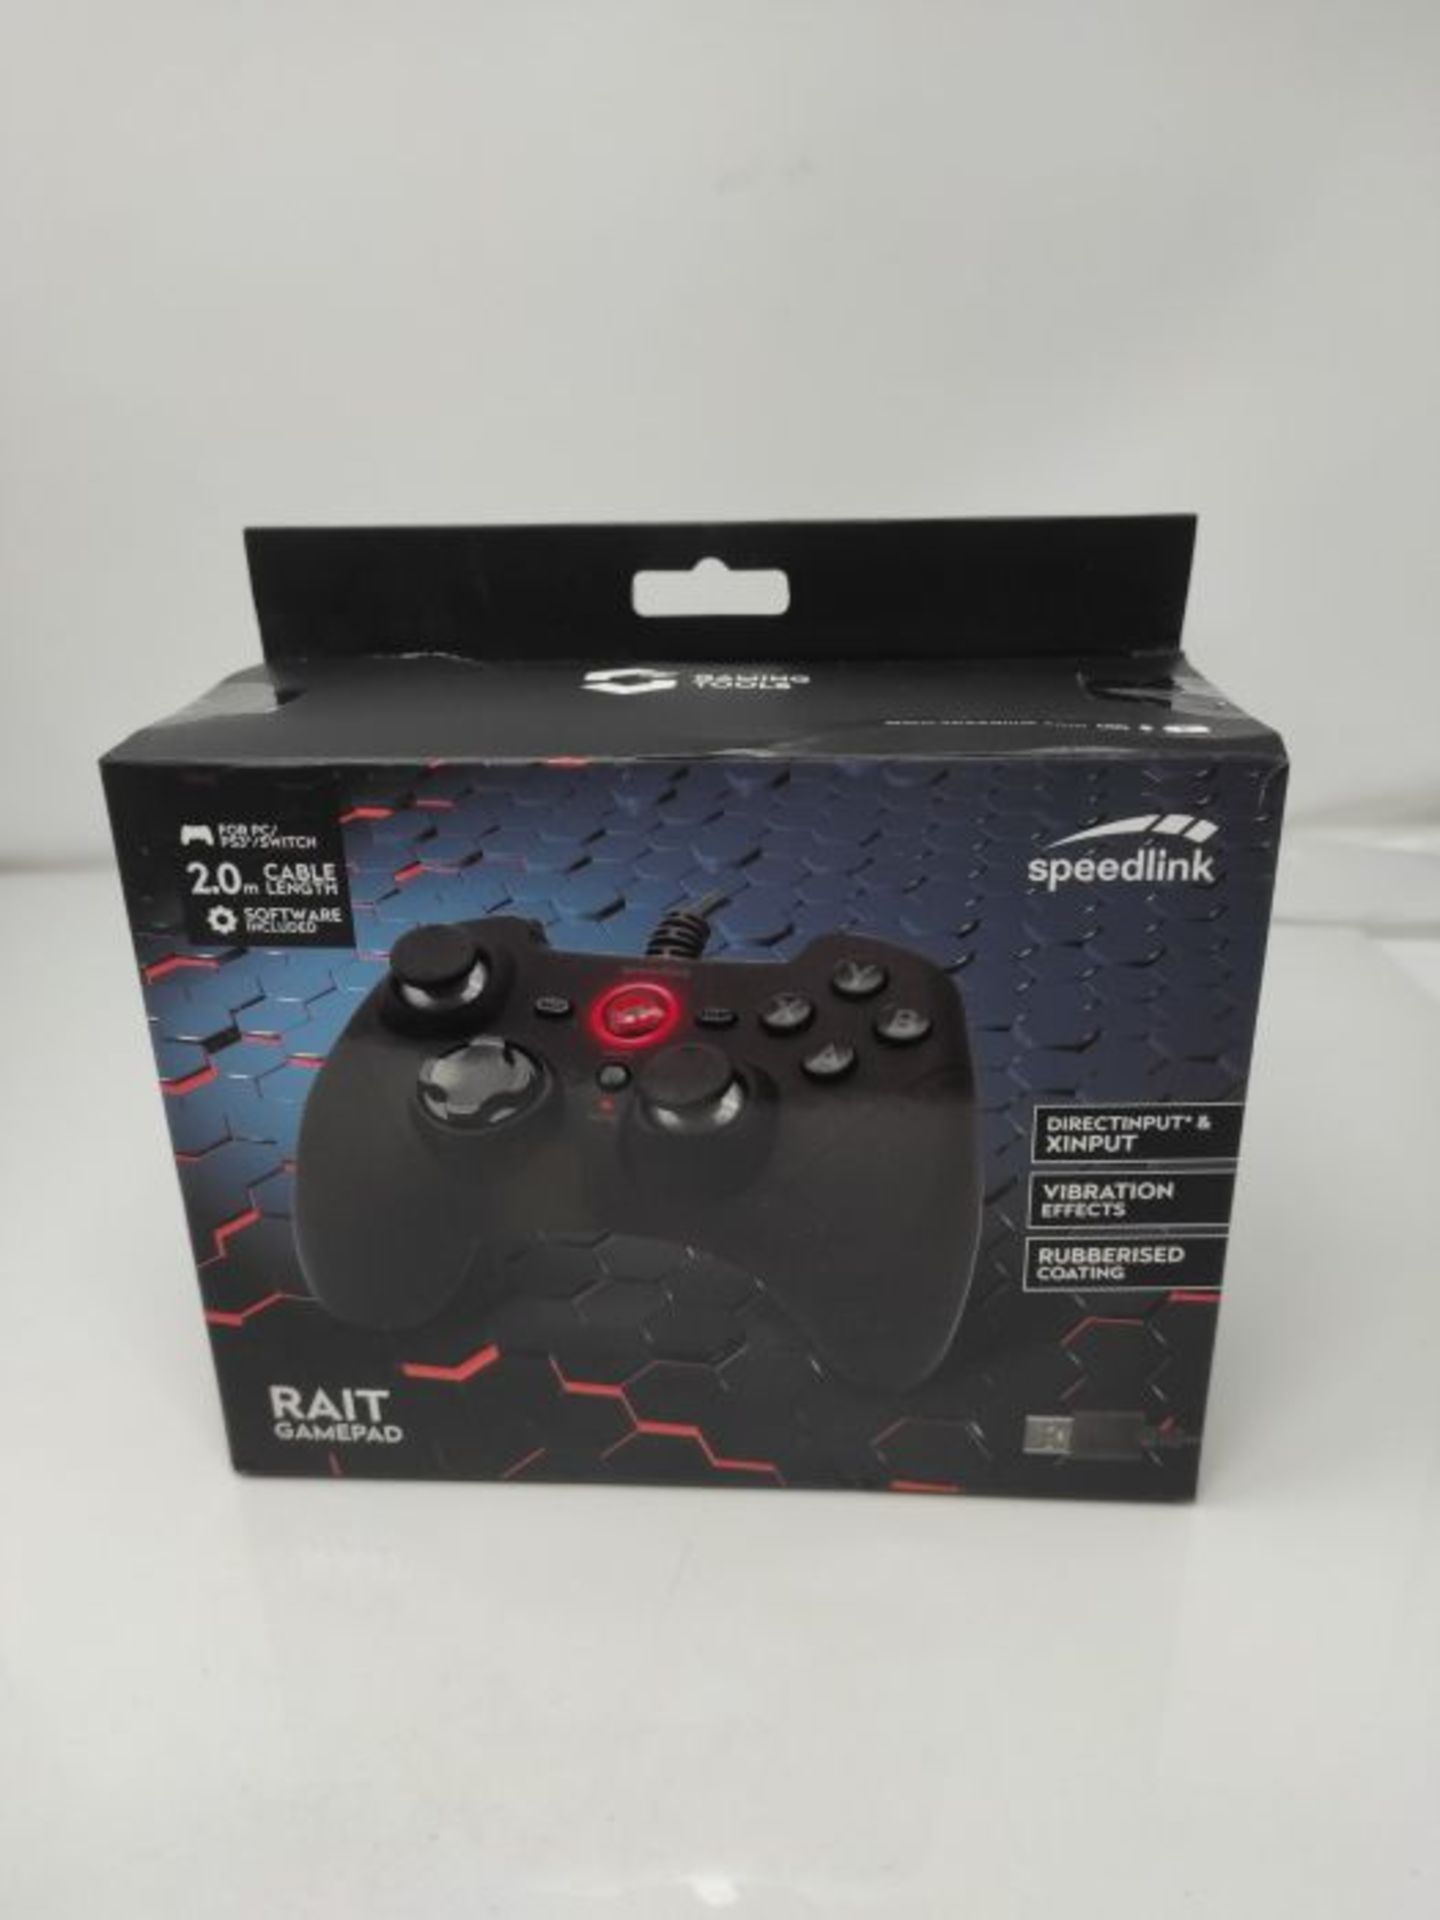 Speedlink RAIT Gamepad - wired gamepad with vibration function, for PC/PS3/Switch, bla - Image 2 of 3